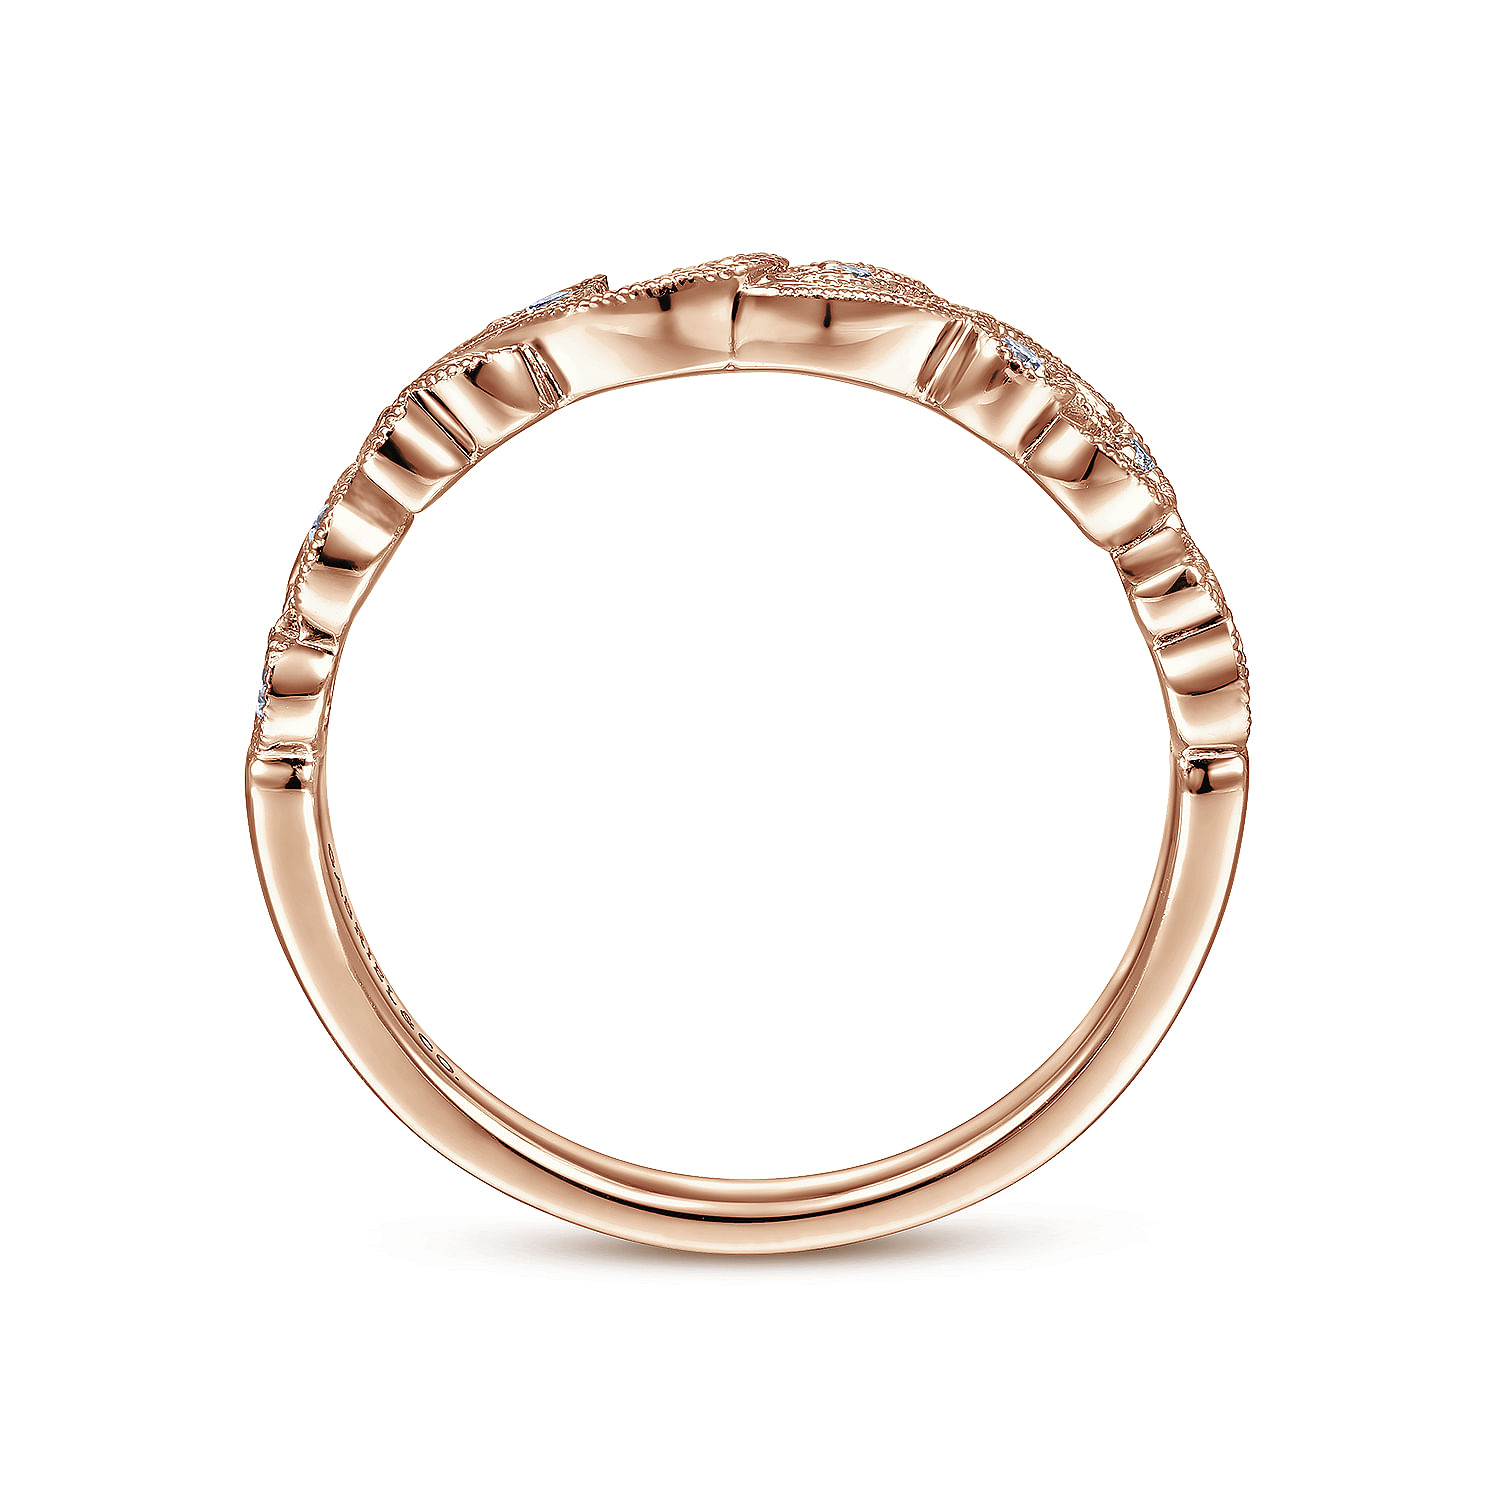 Floral 14K Rose Gold Diamond Anniversary Band with Milgrain